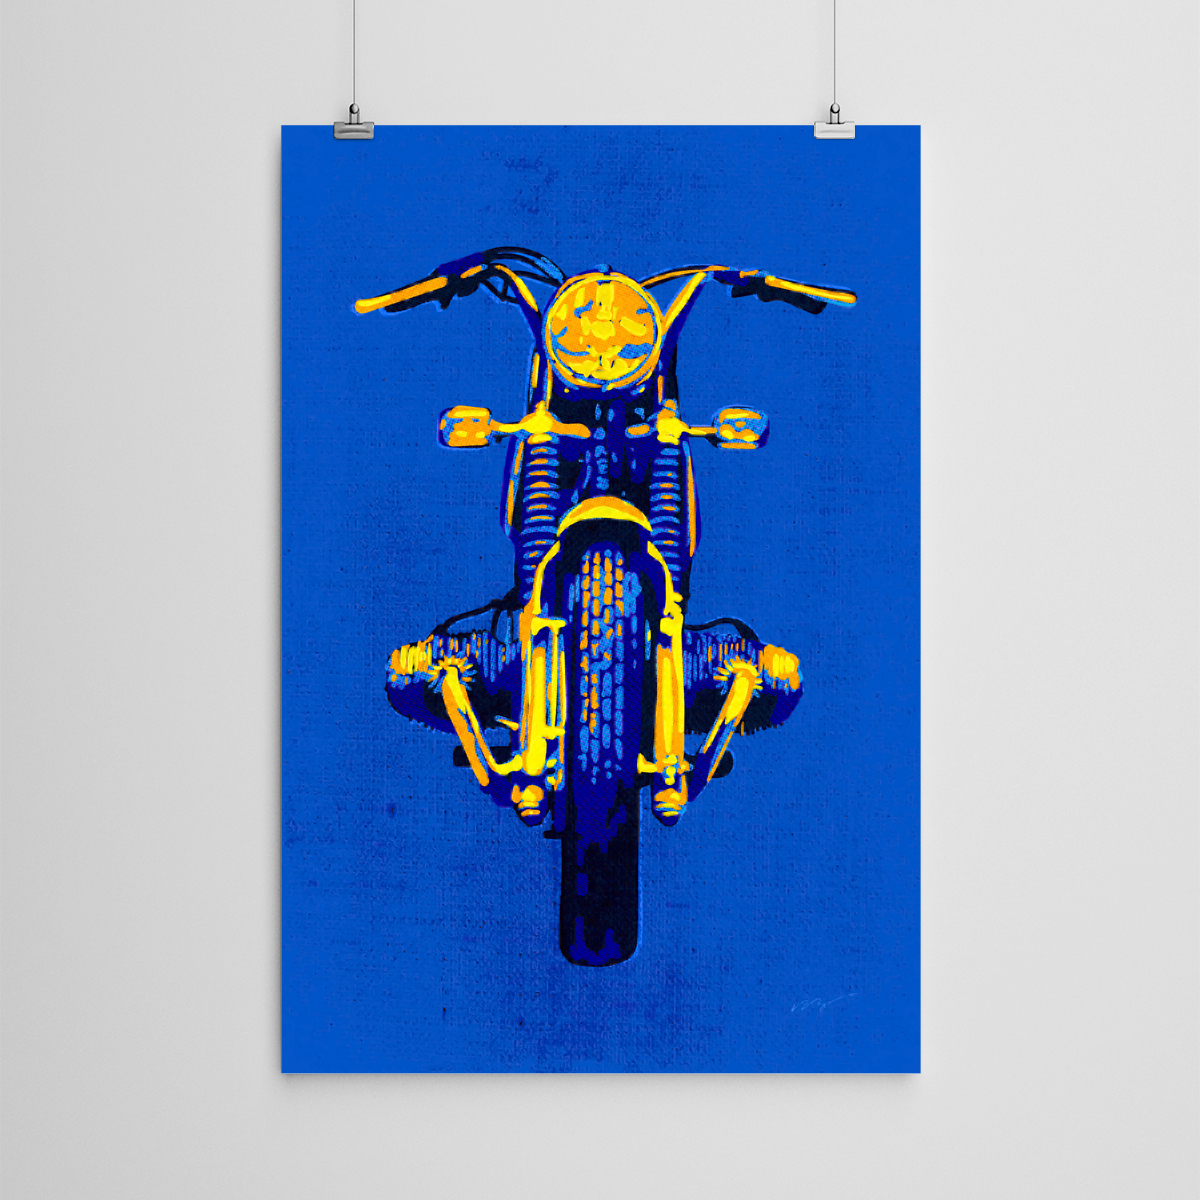 ILLUSTRATION  Drawing  Pop Art colorful blue yellow vintage motorcycle